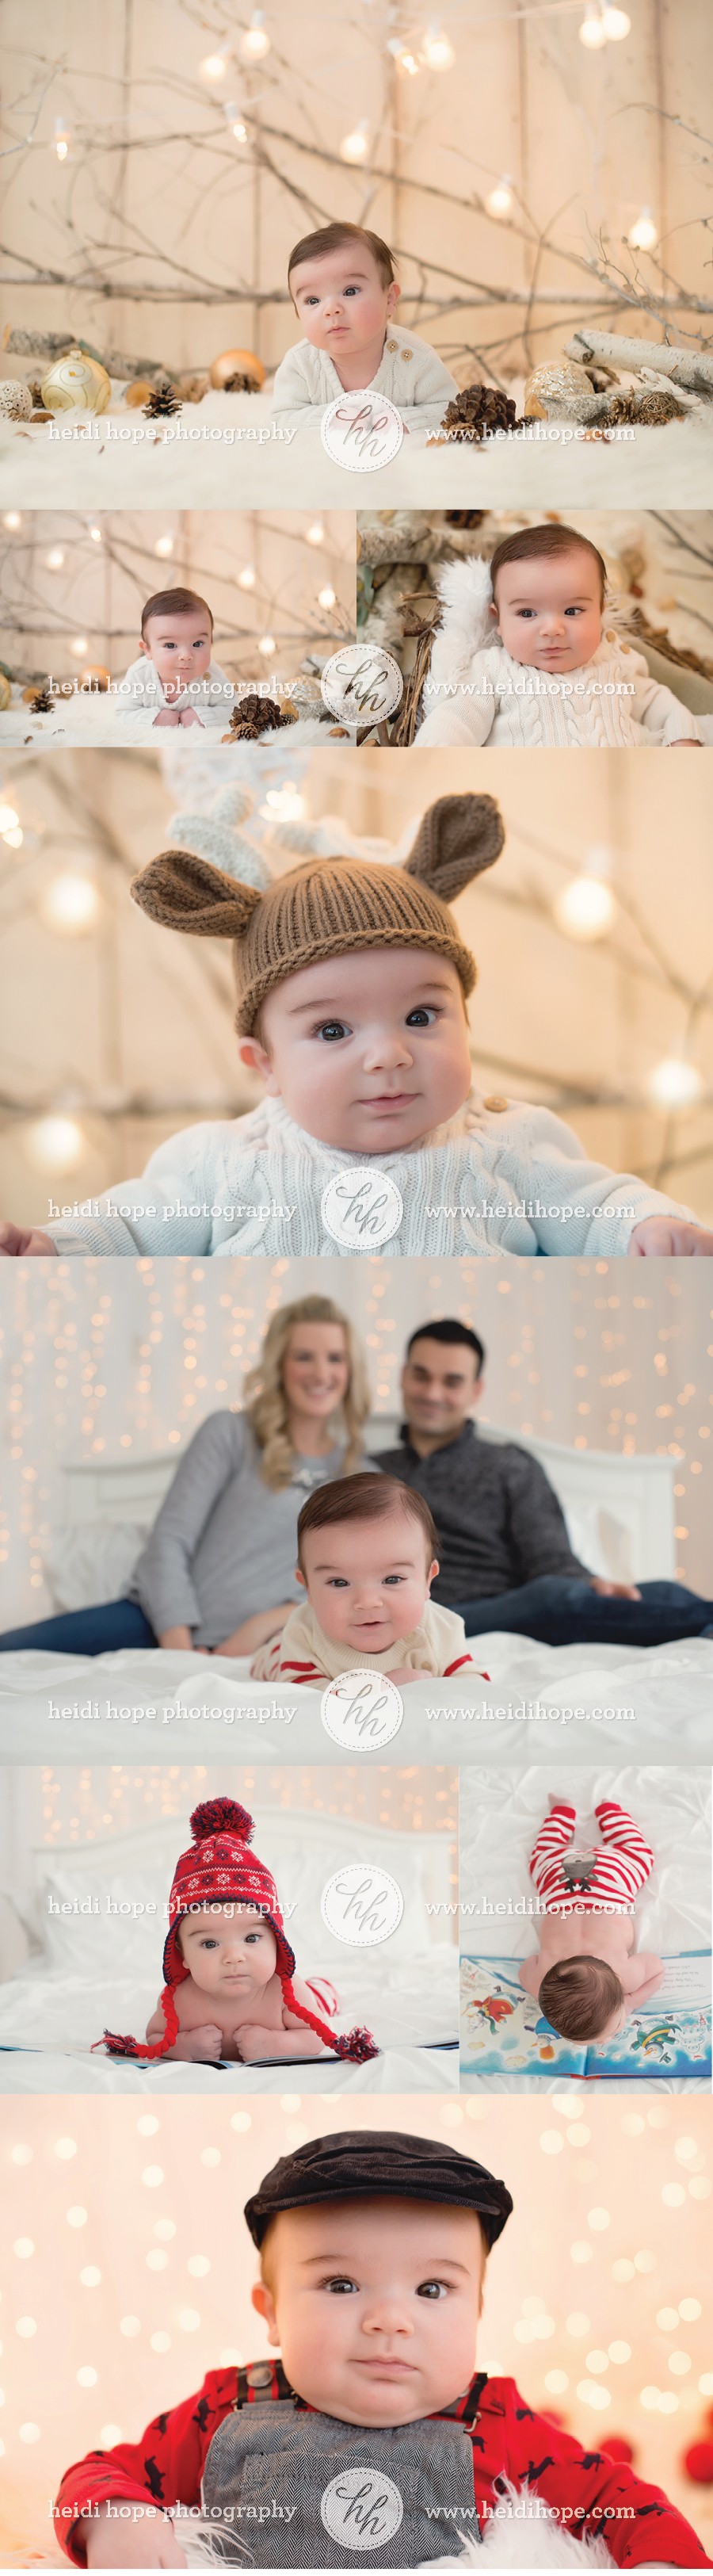 2 month old holiday shoot | HHP